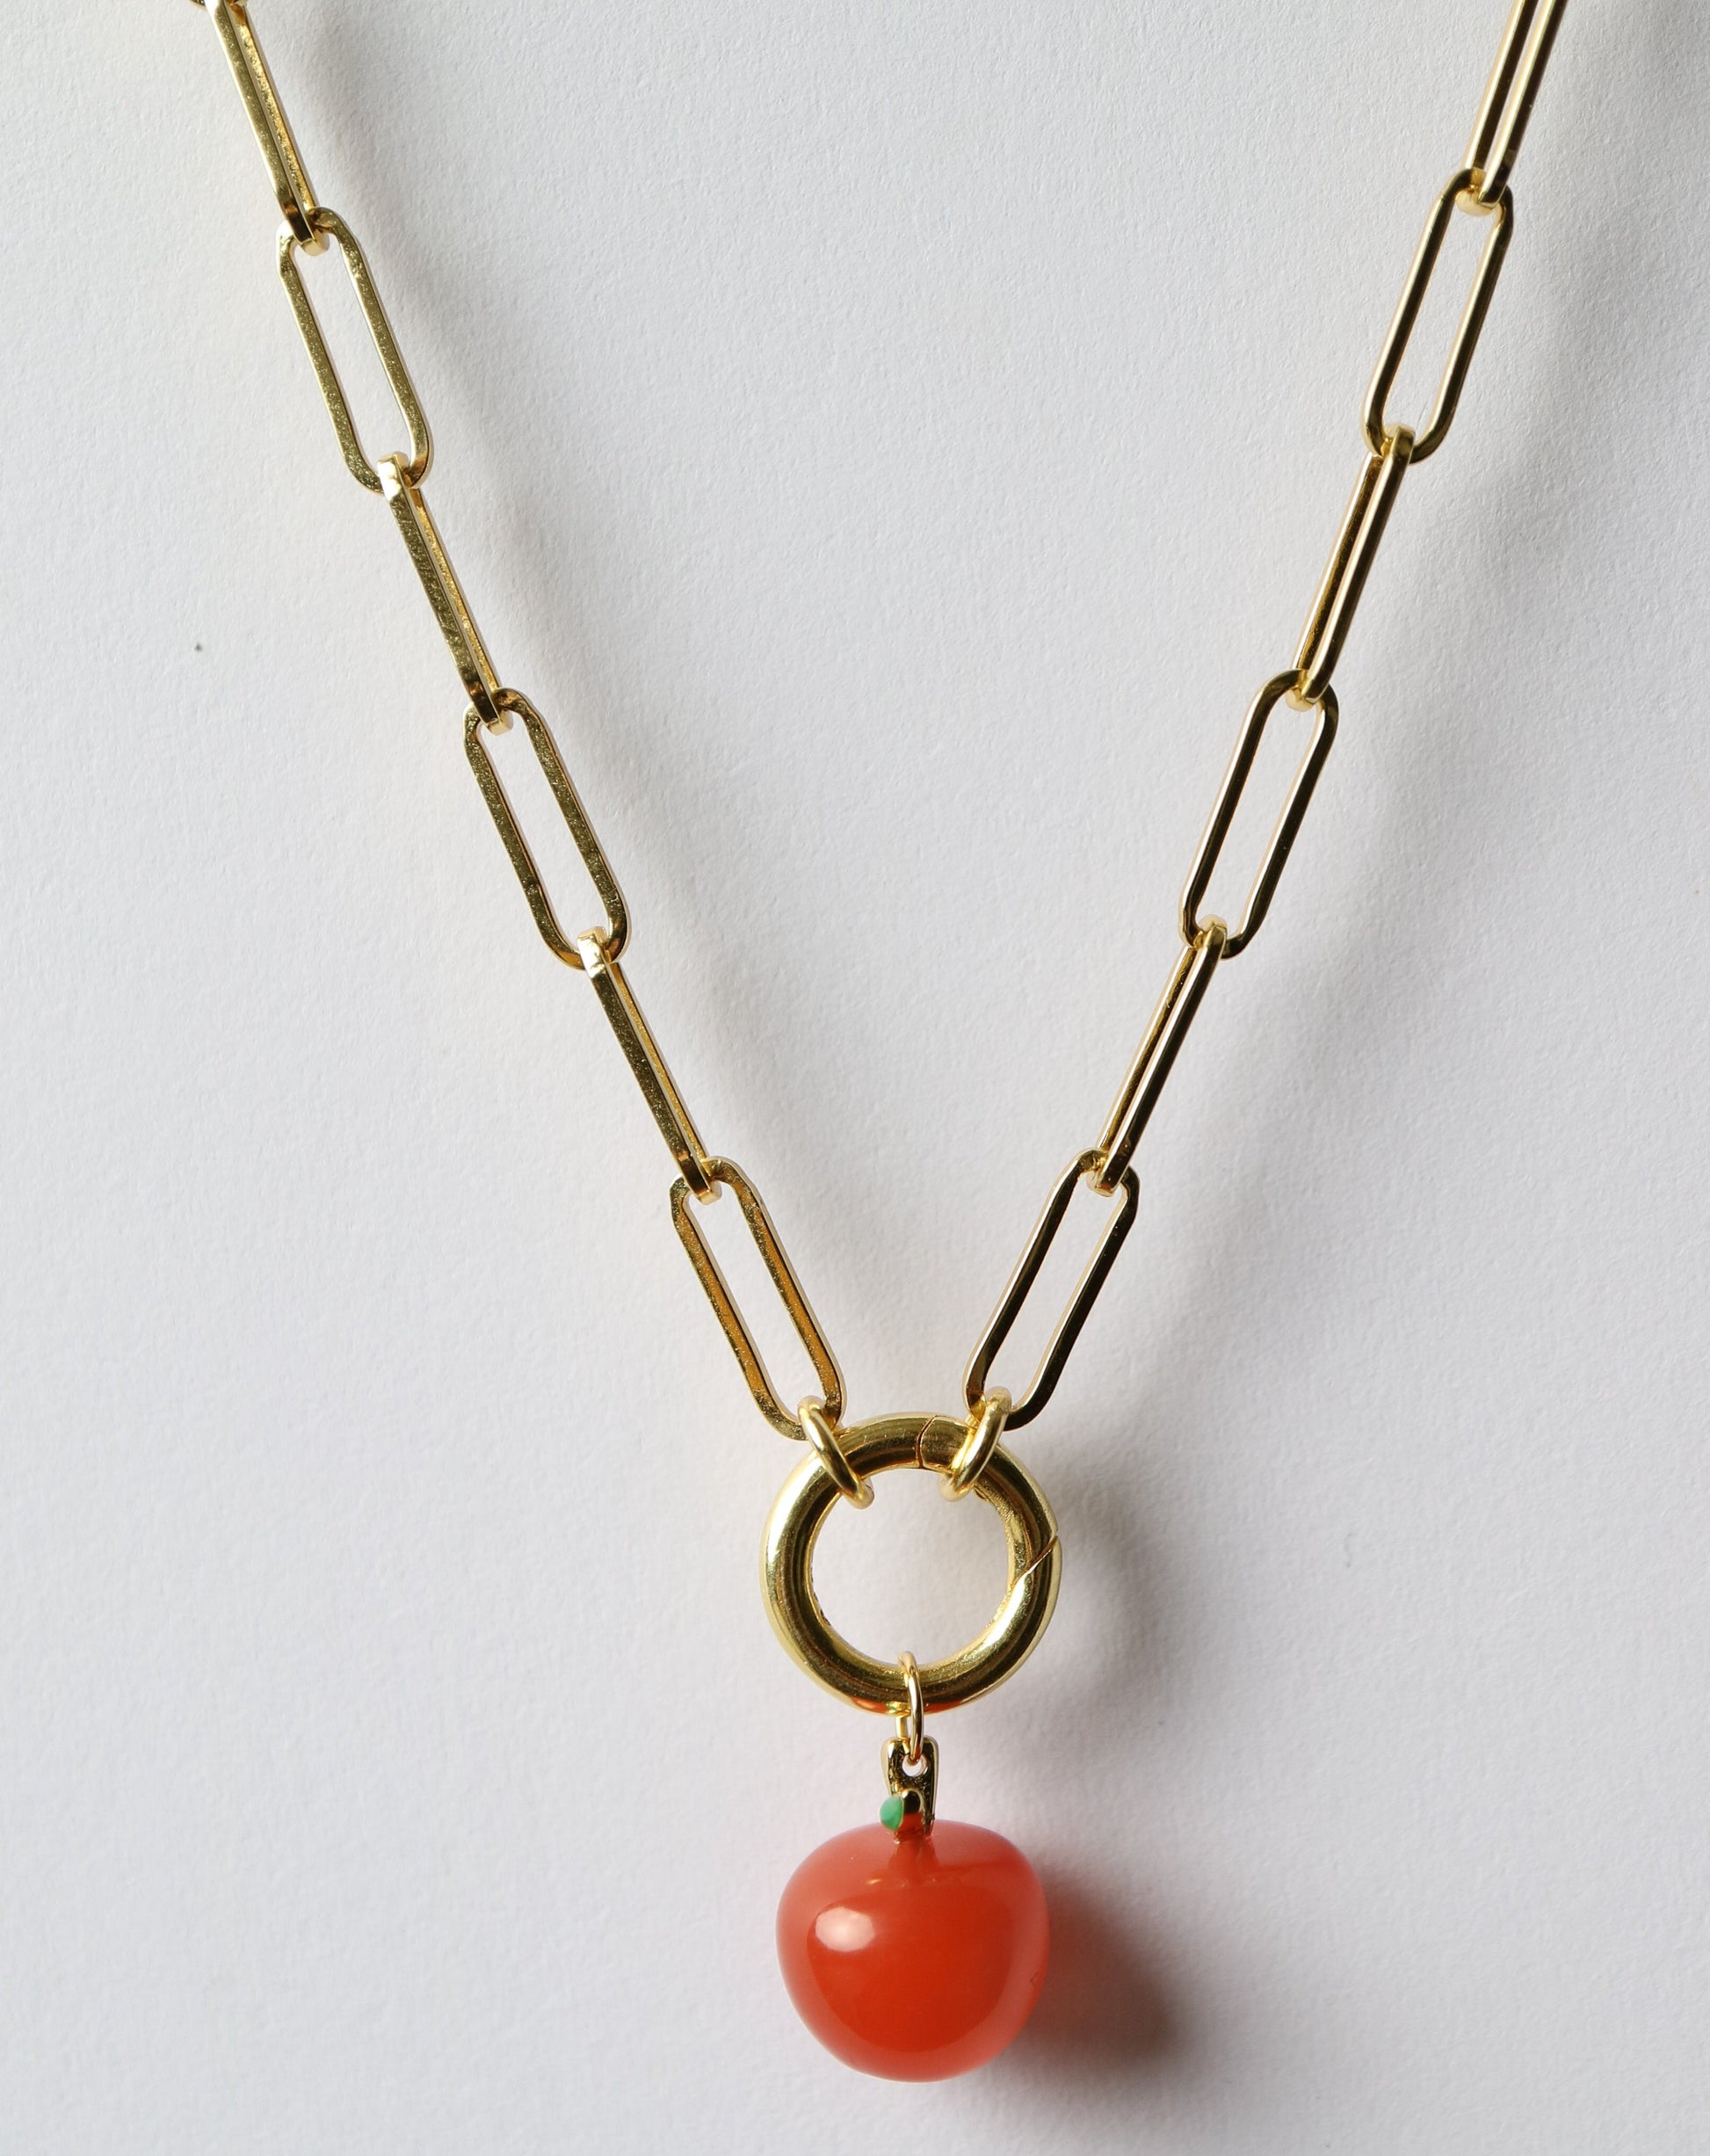 Paperclip Charm Necklace with apple charm